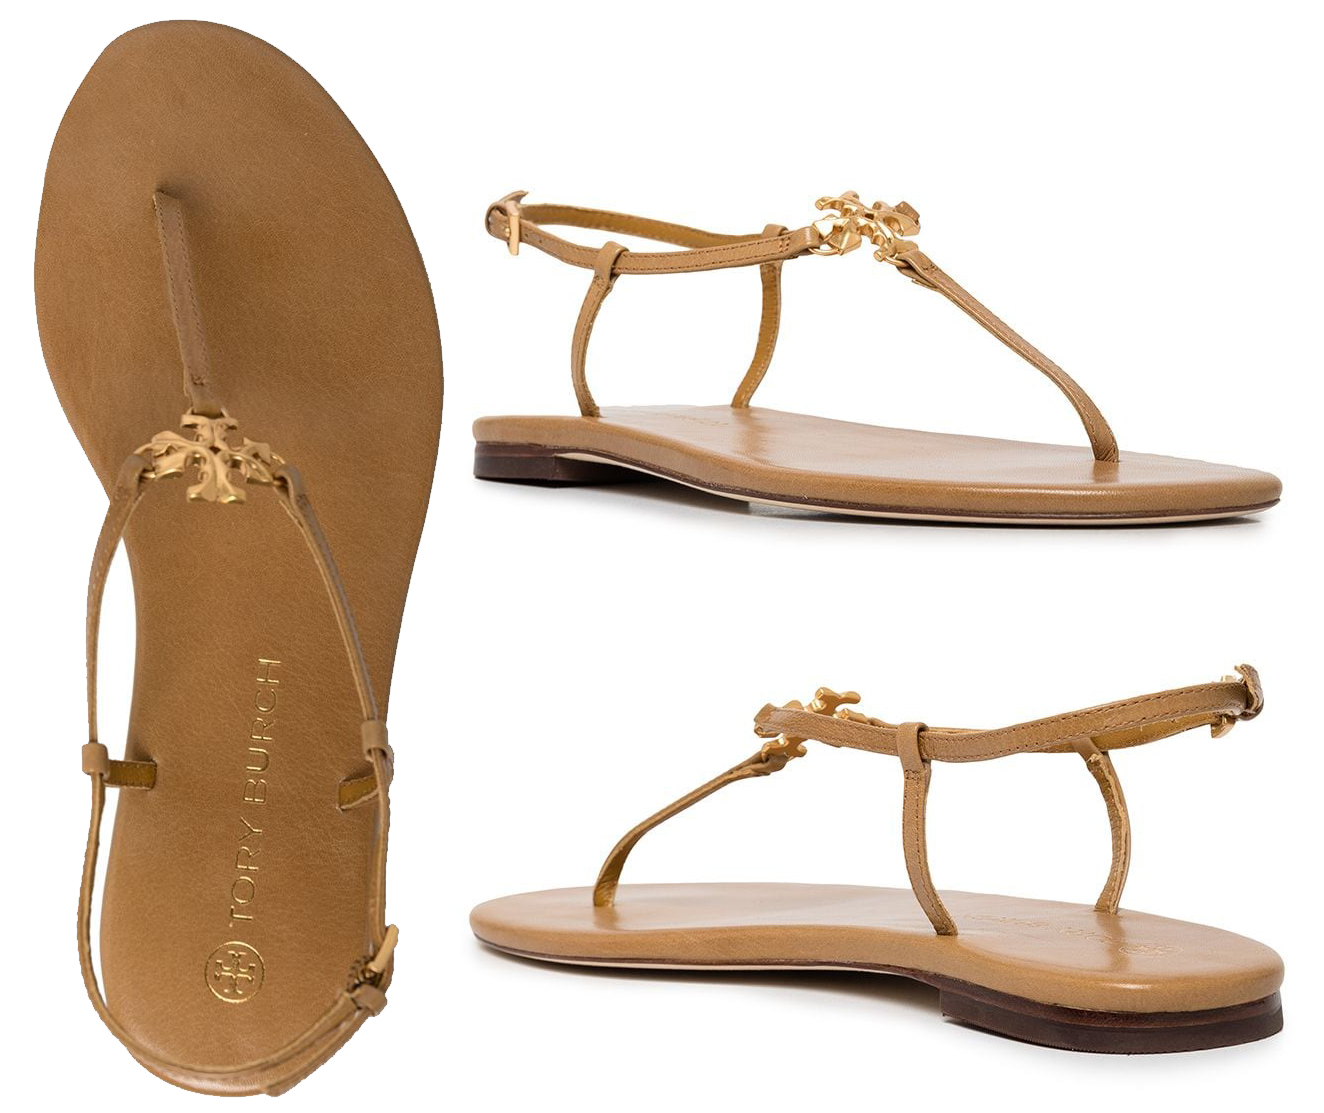 Minimalist yet chic, the Capri sandals feature a delicate buckle and carved Double T on the vamp